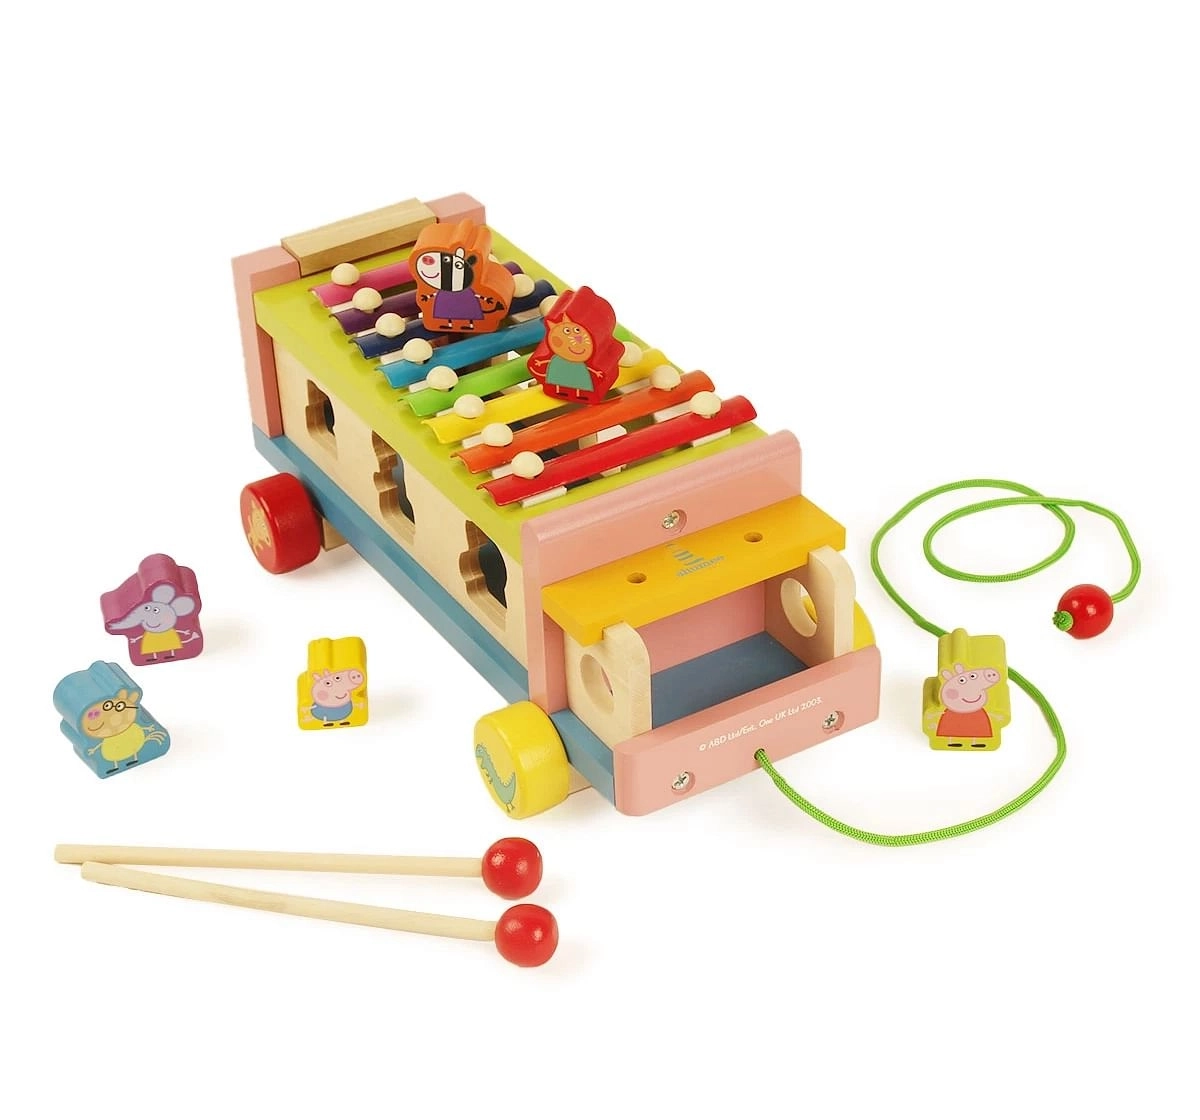 Shumee Peppa and Friends Musical Truck for kids 18M+, Multicolour